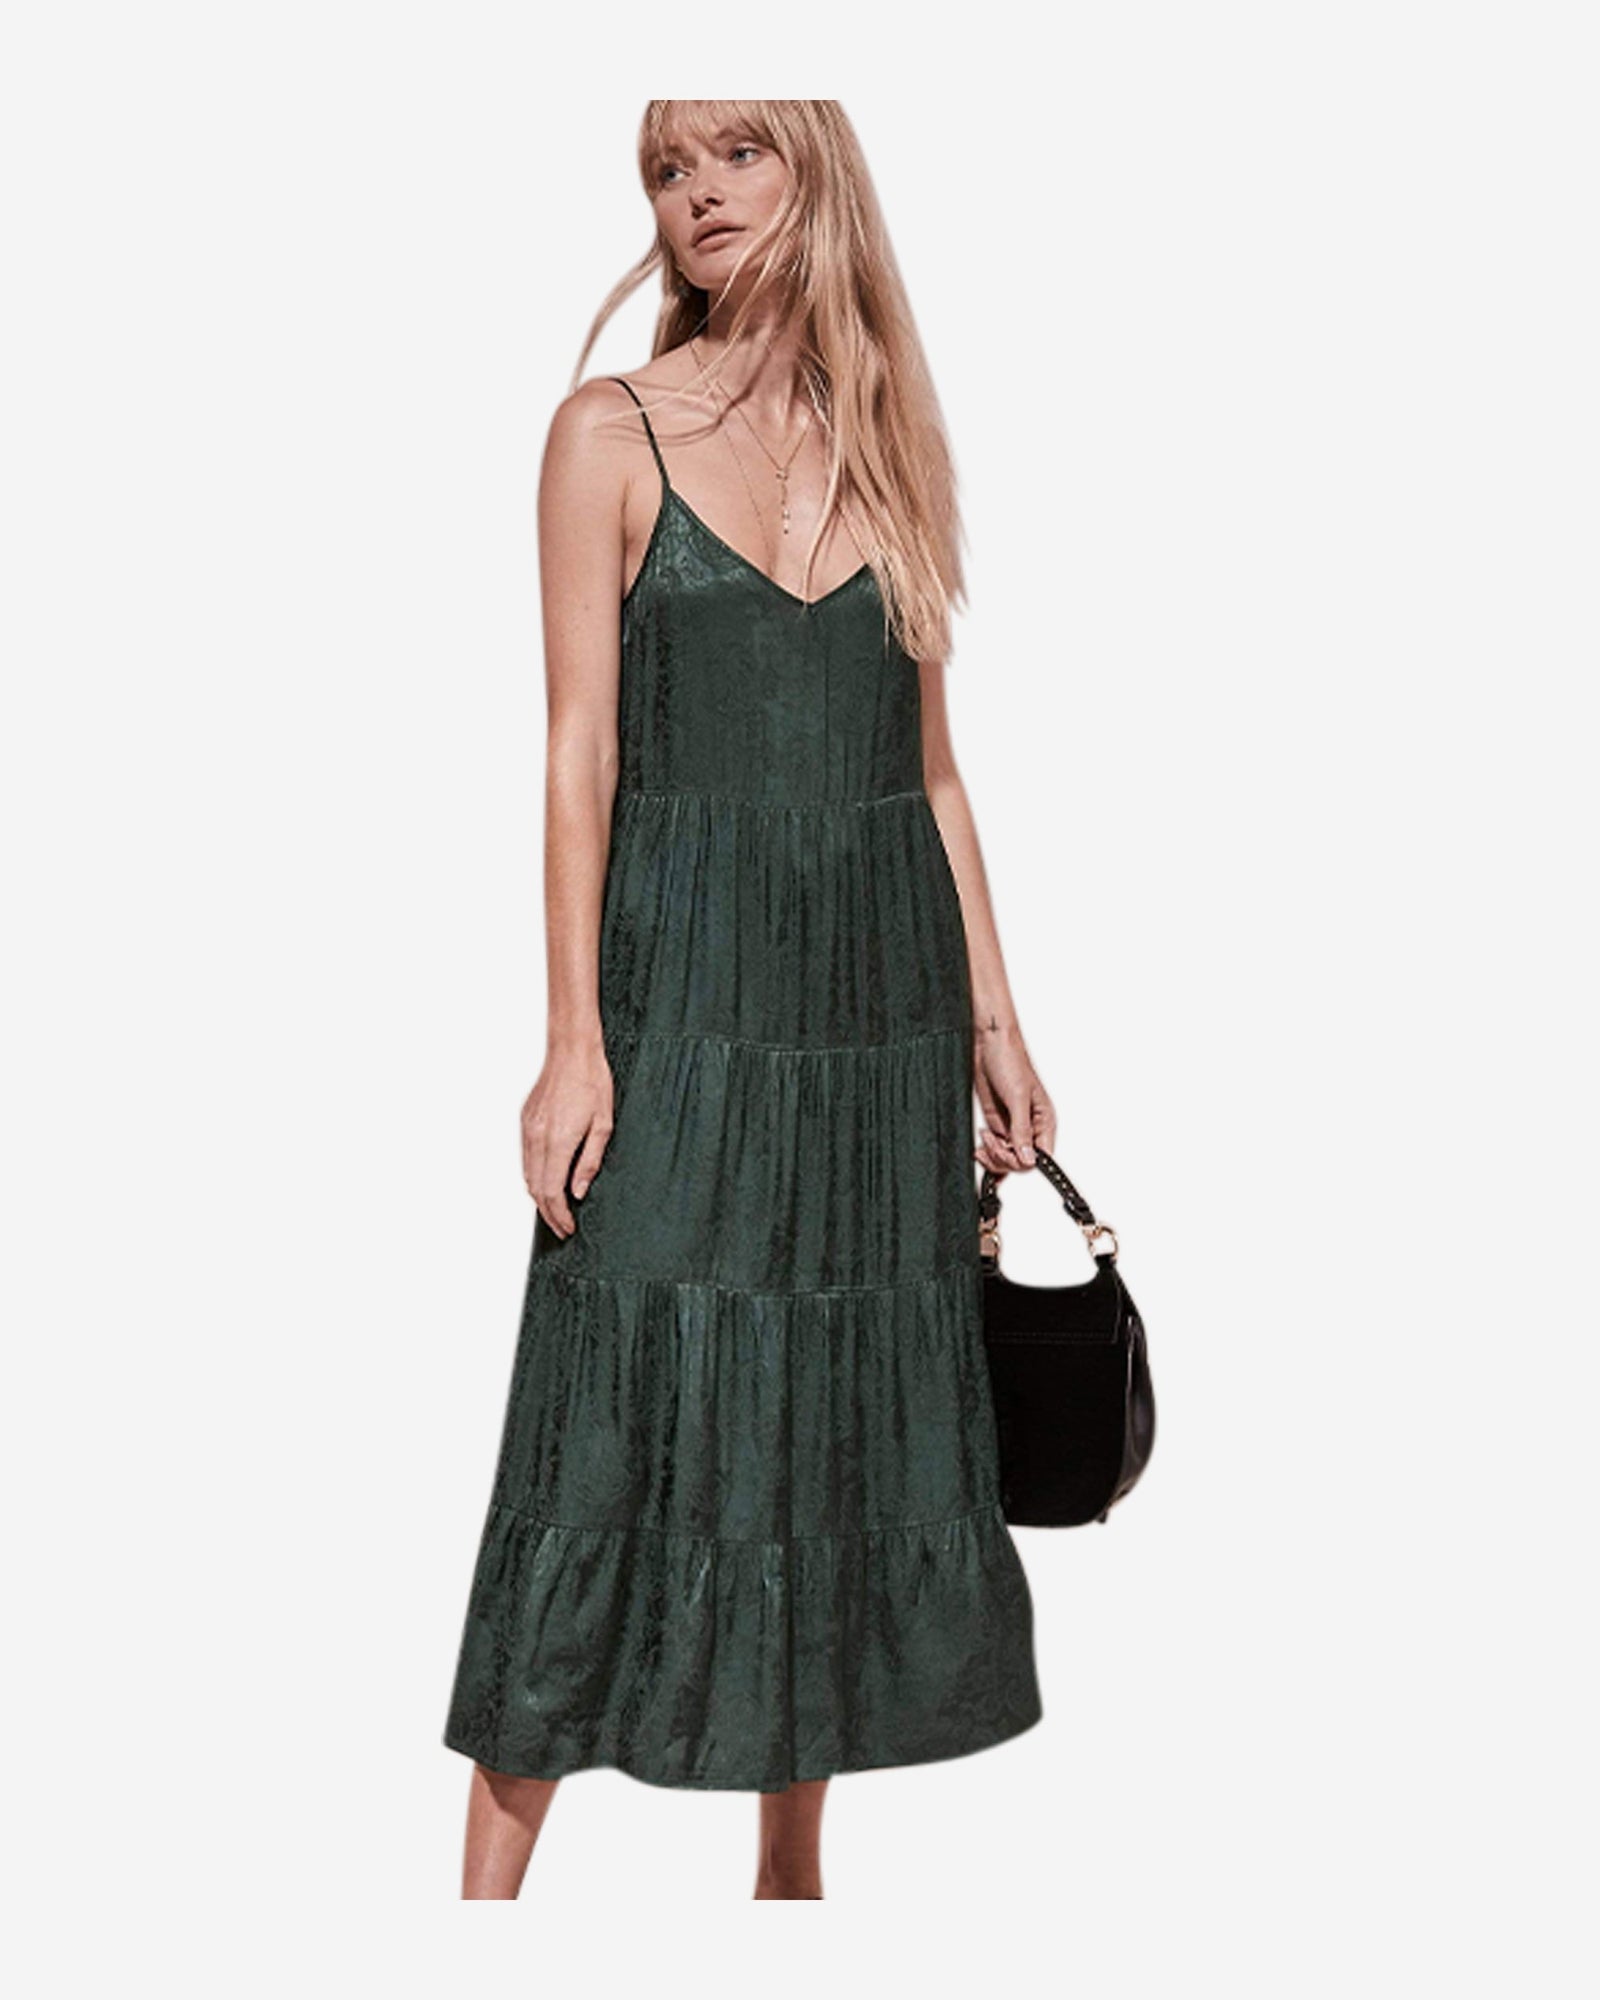 Beth's Paisley Jacquard Emerald Green Midi dress by Auguste the Label